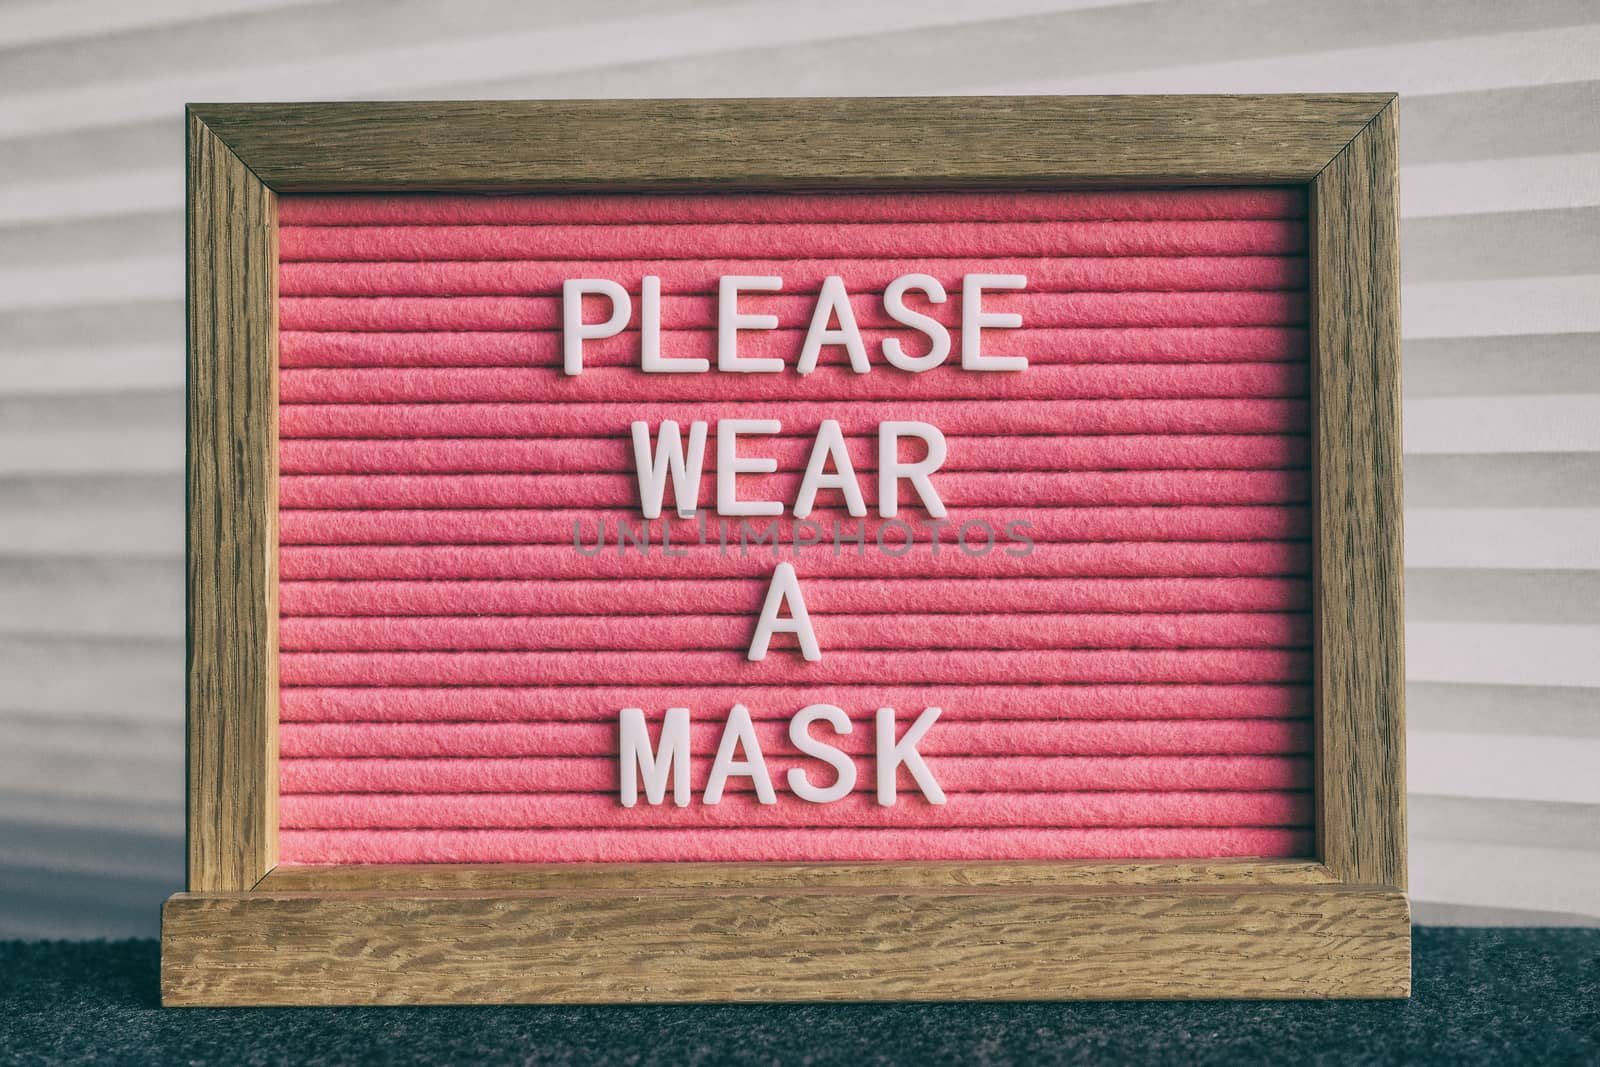 COVID-19 sign PLEASE WEAR A MASK at grocery store entrance for coronavirus prevention. Message on pink felt letter board. Compulsory measure in businesses for face protection wearing.